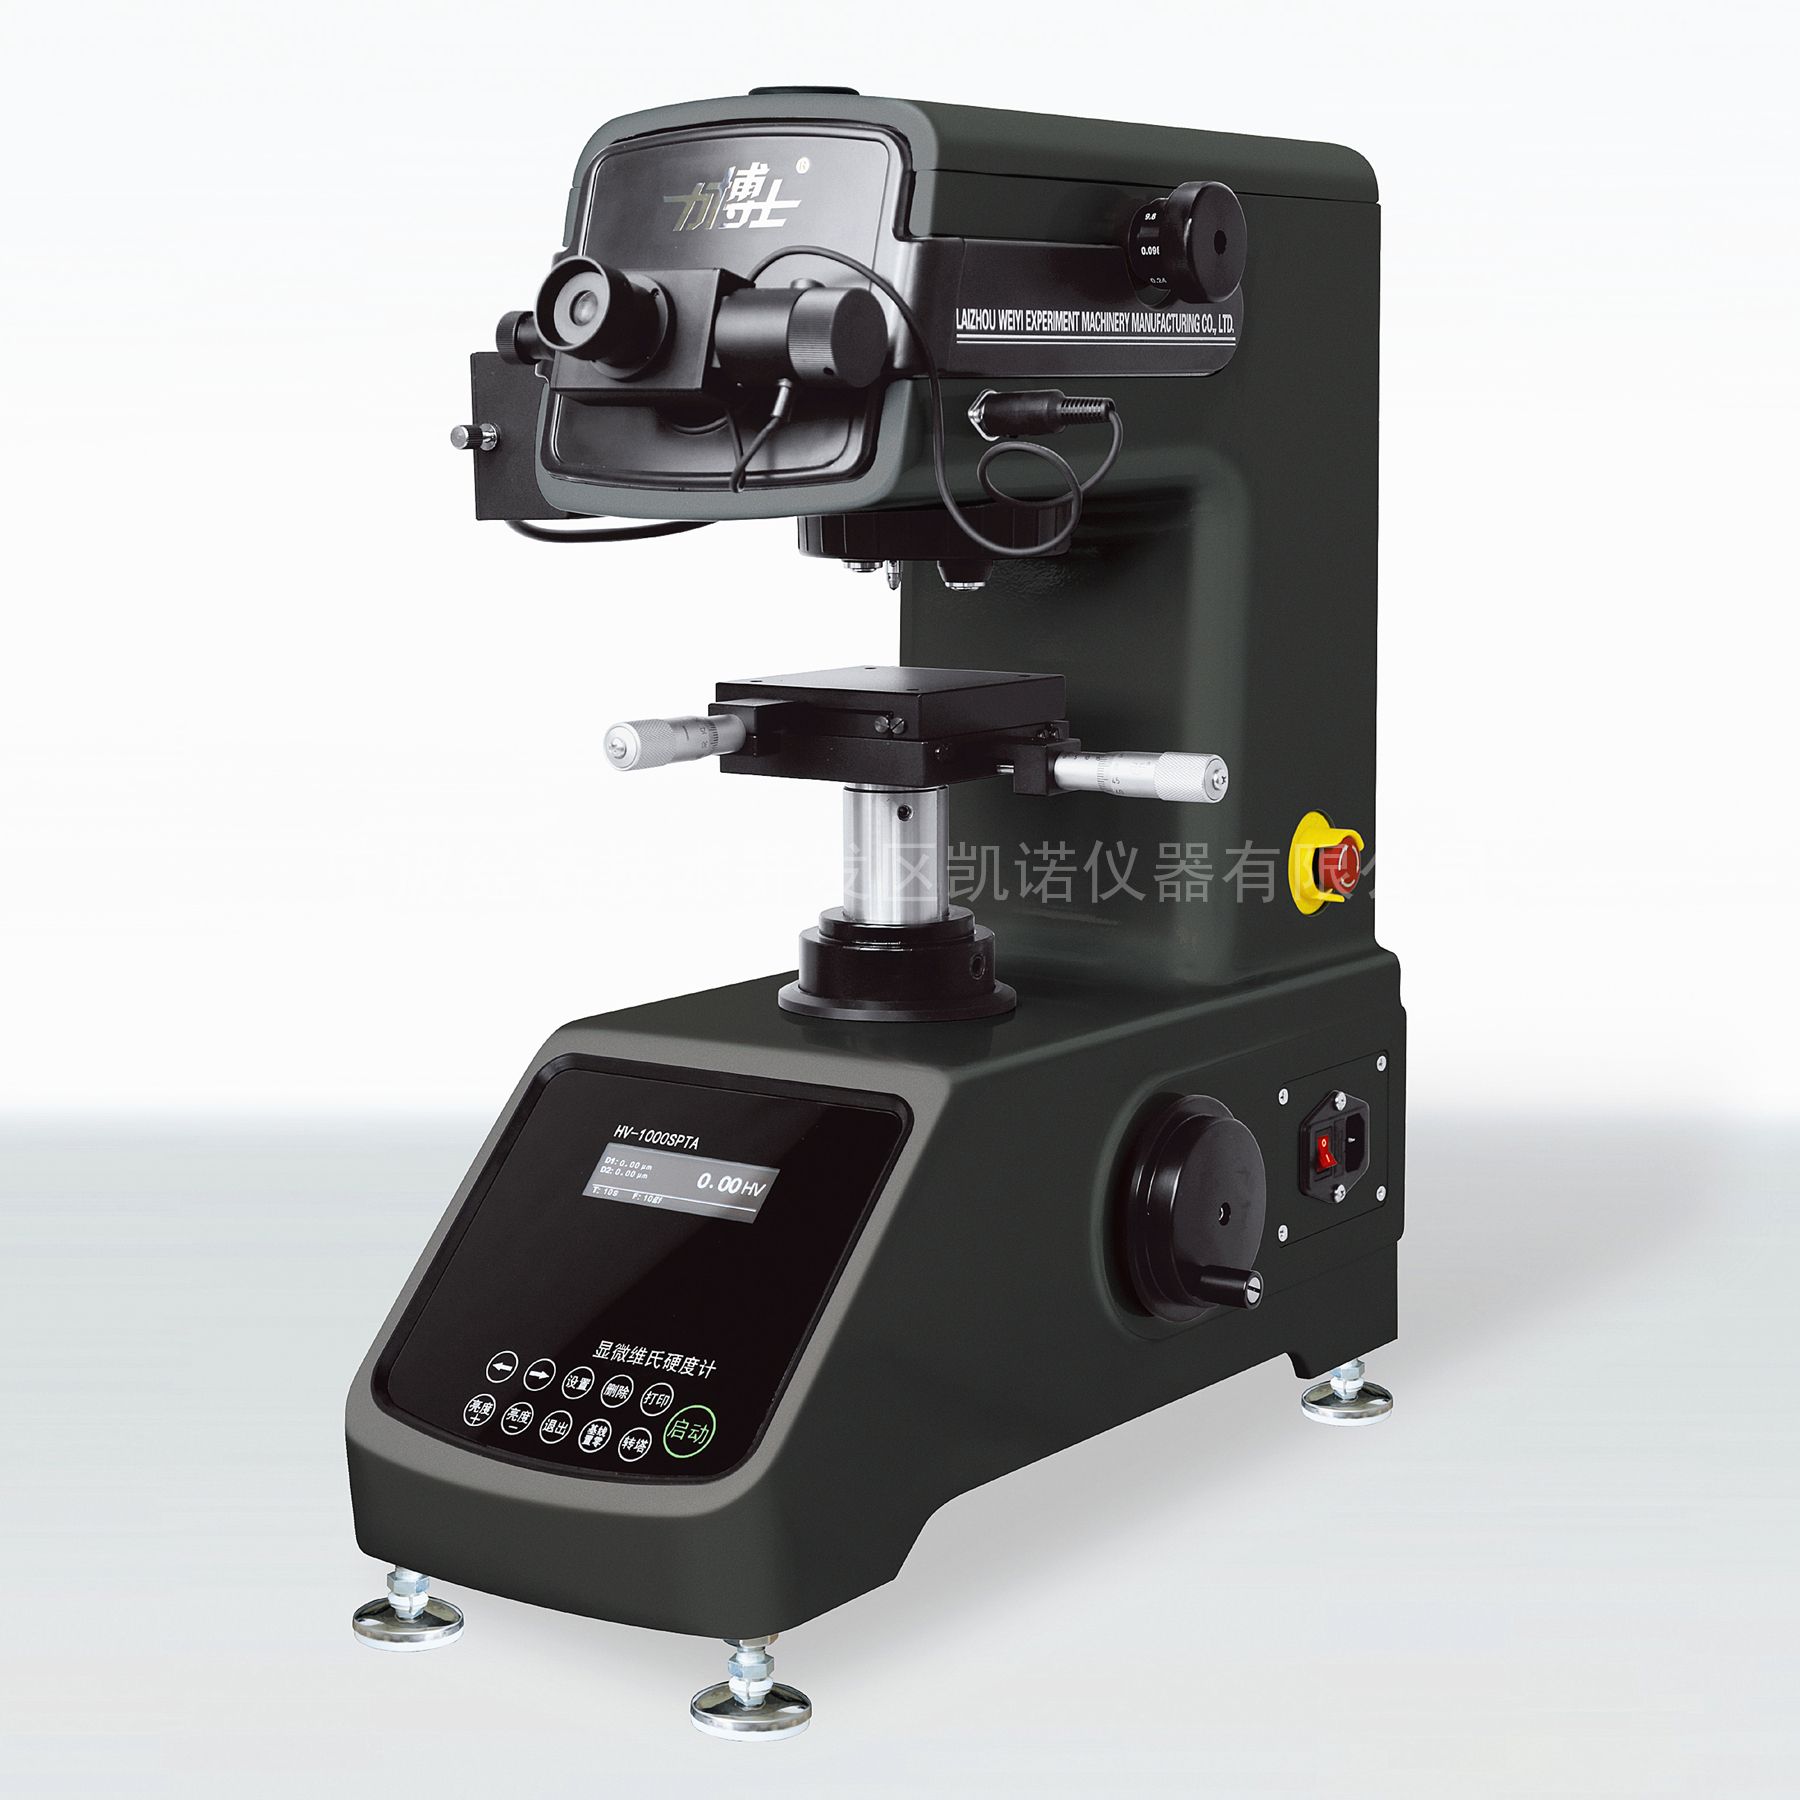 ʿHV-1000ϵ΢Ӳȼ Small Load Vickers Hardness Tester